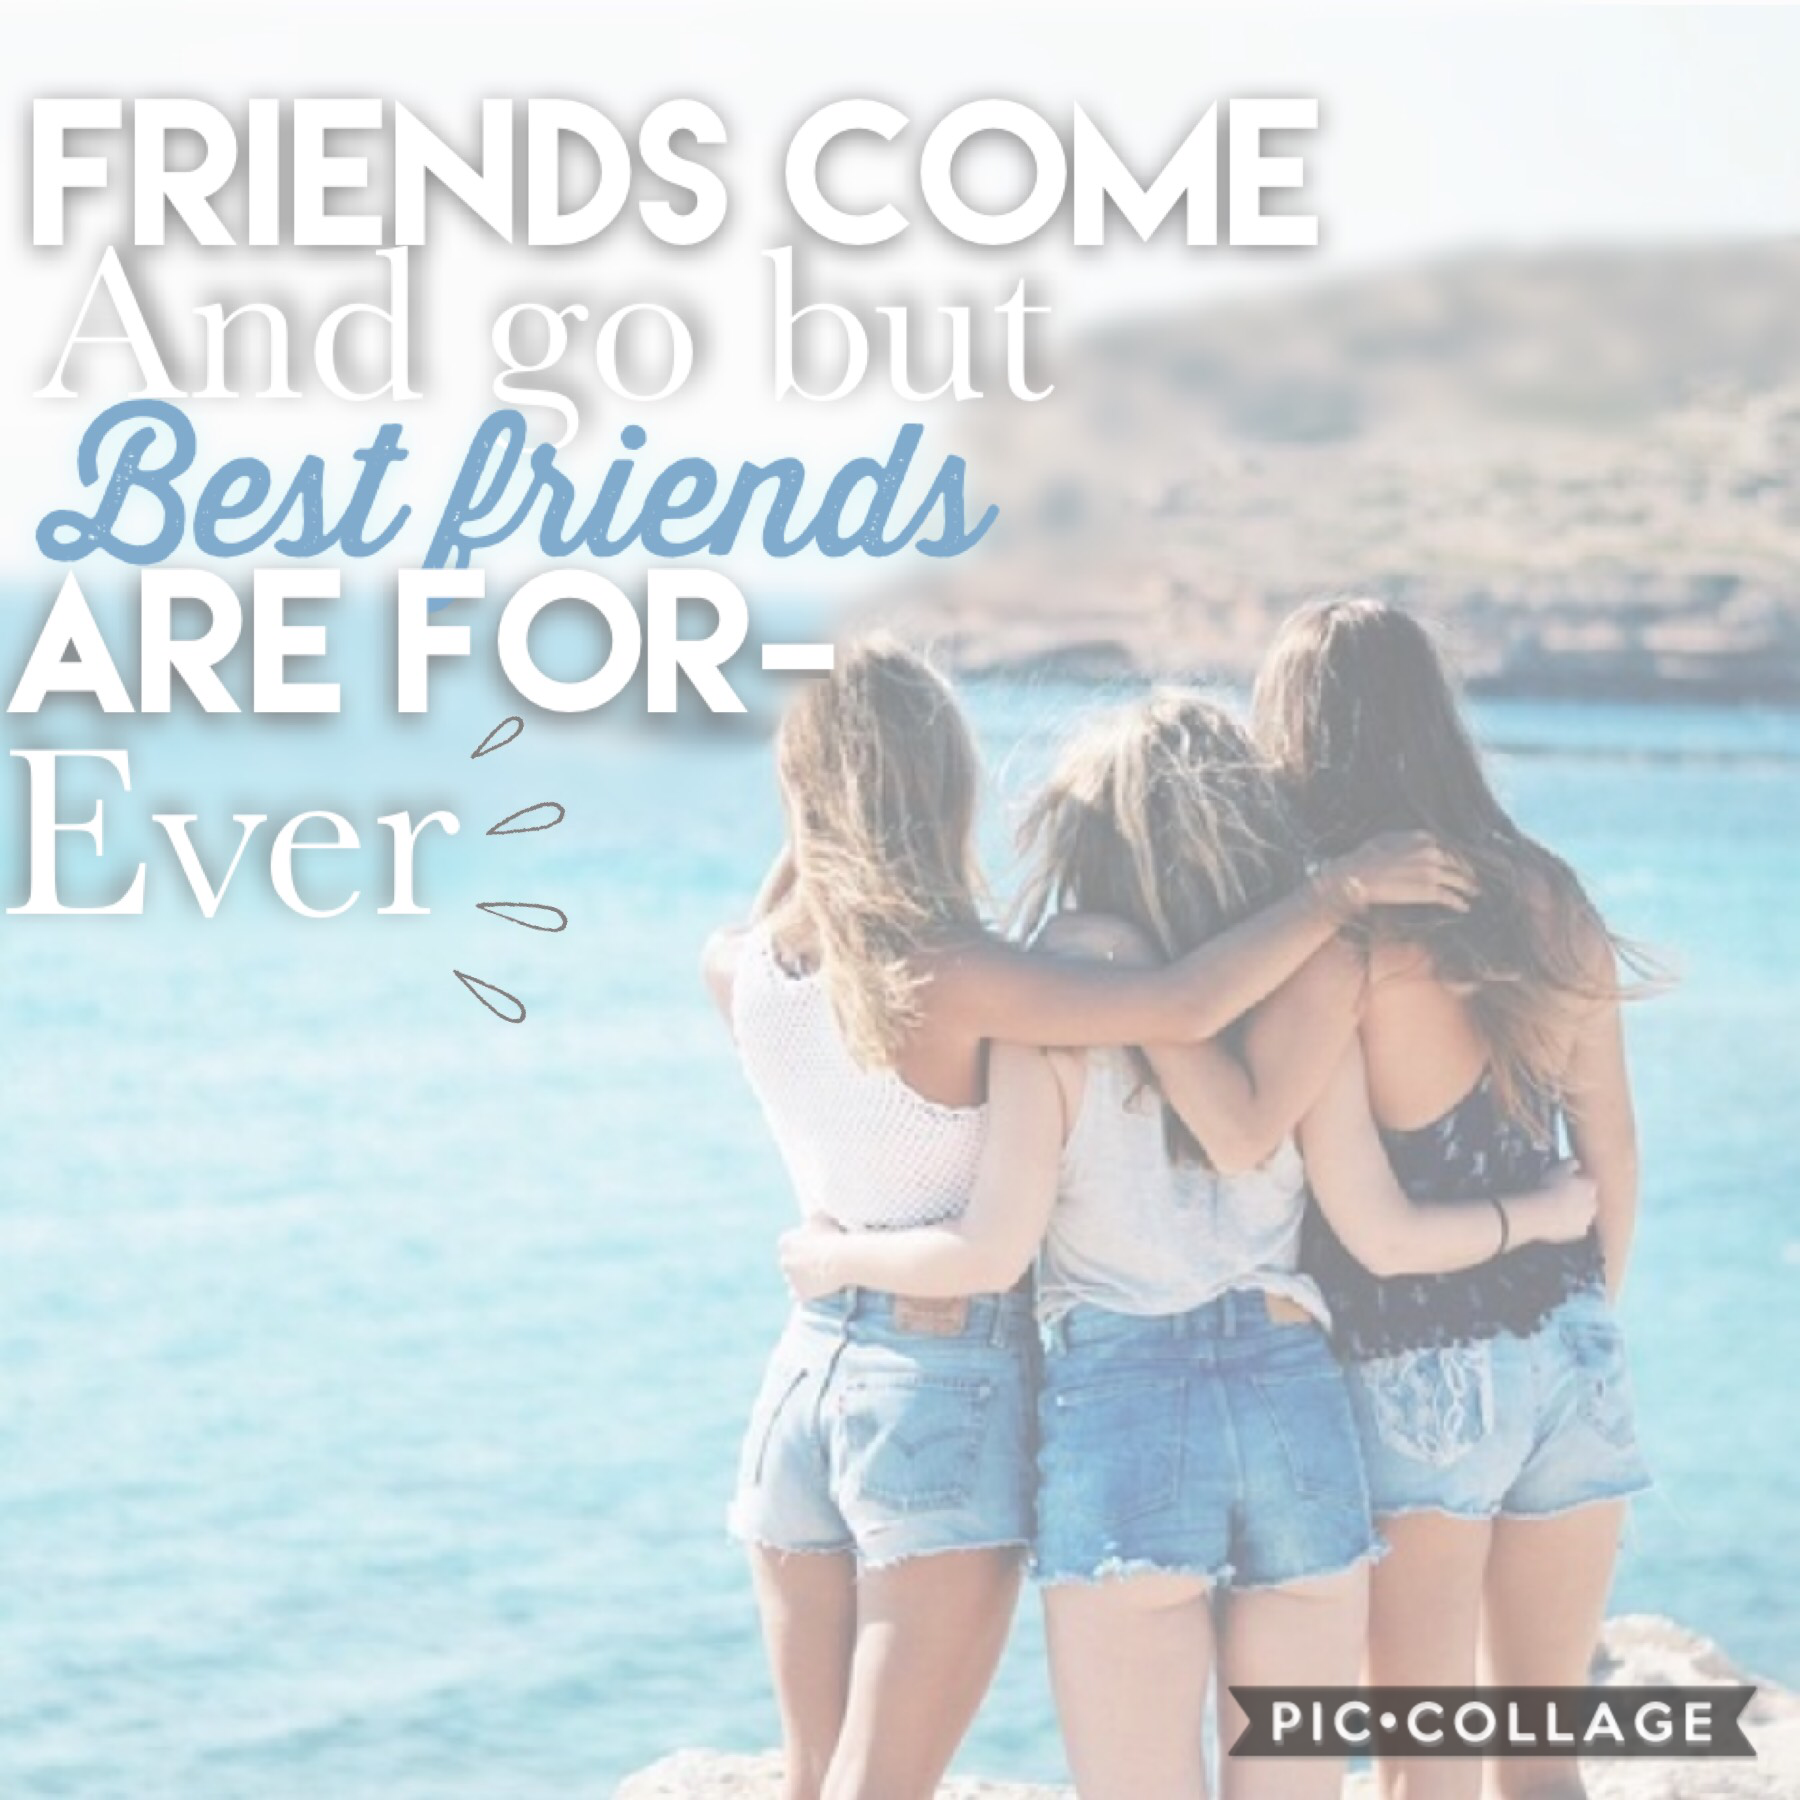 This is hideous but the quote is so true💗... friend count:1🙄